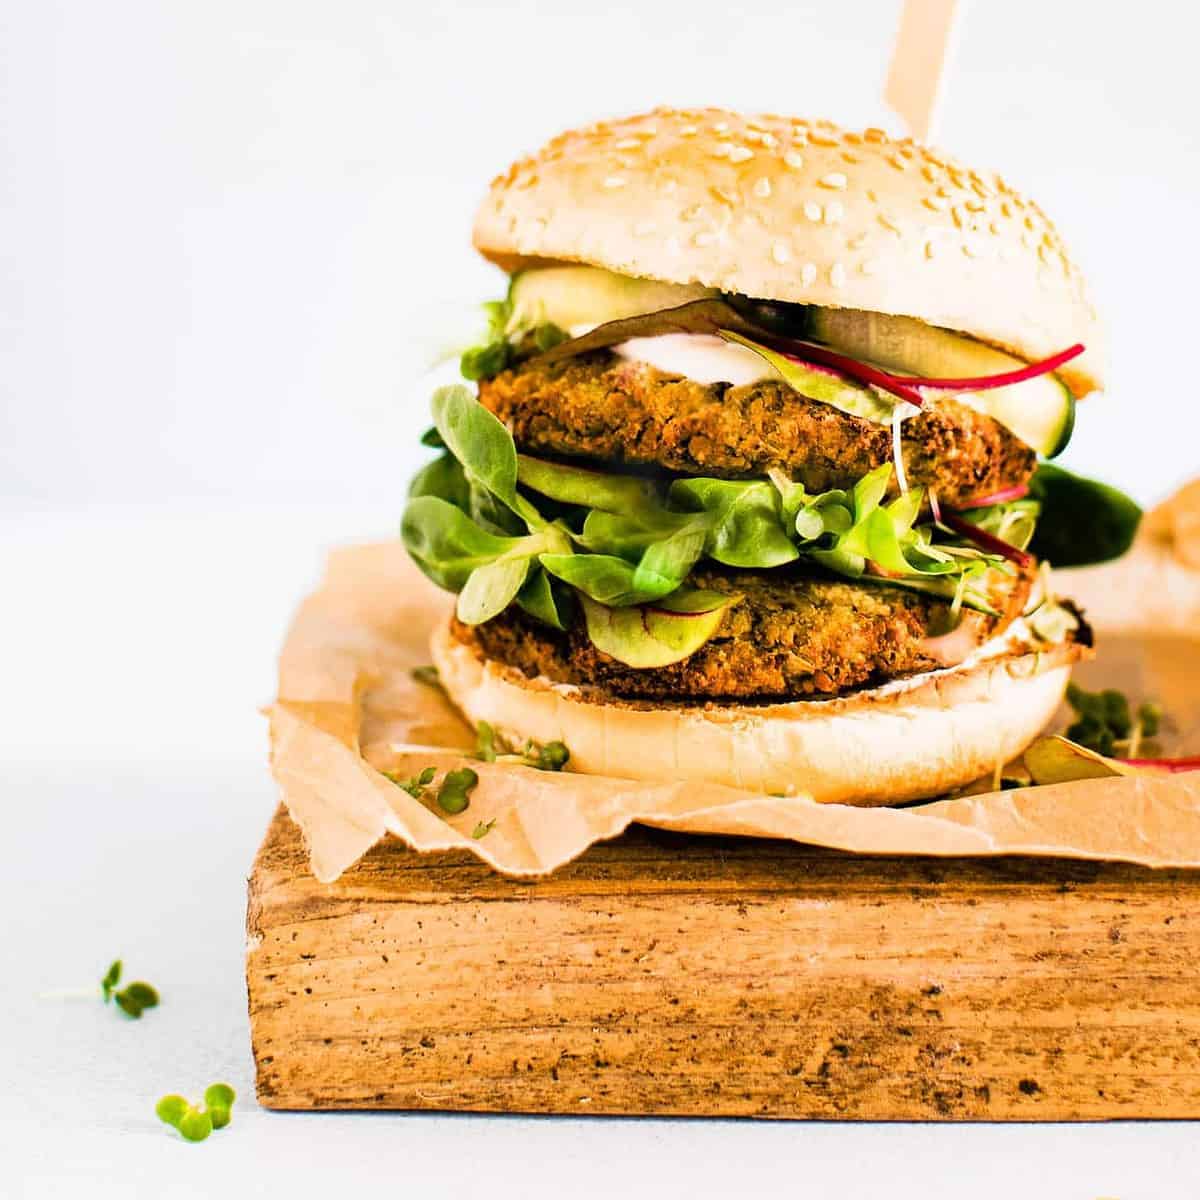  Our veggie burgers are jam-packed with fresh veggies for a wholesome meal.